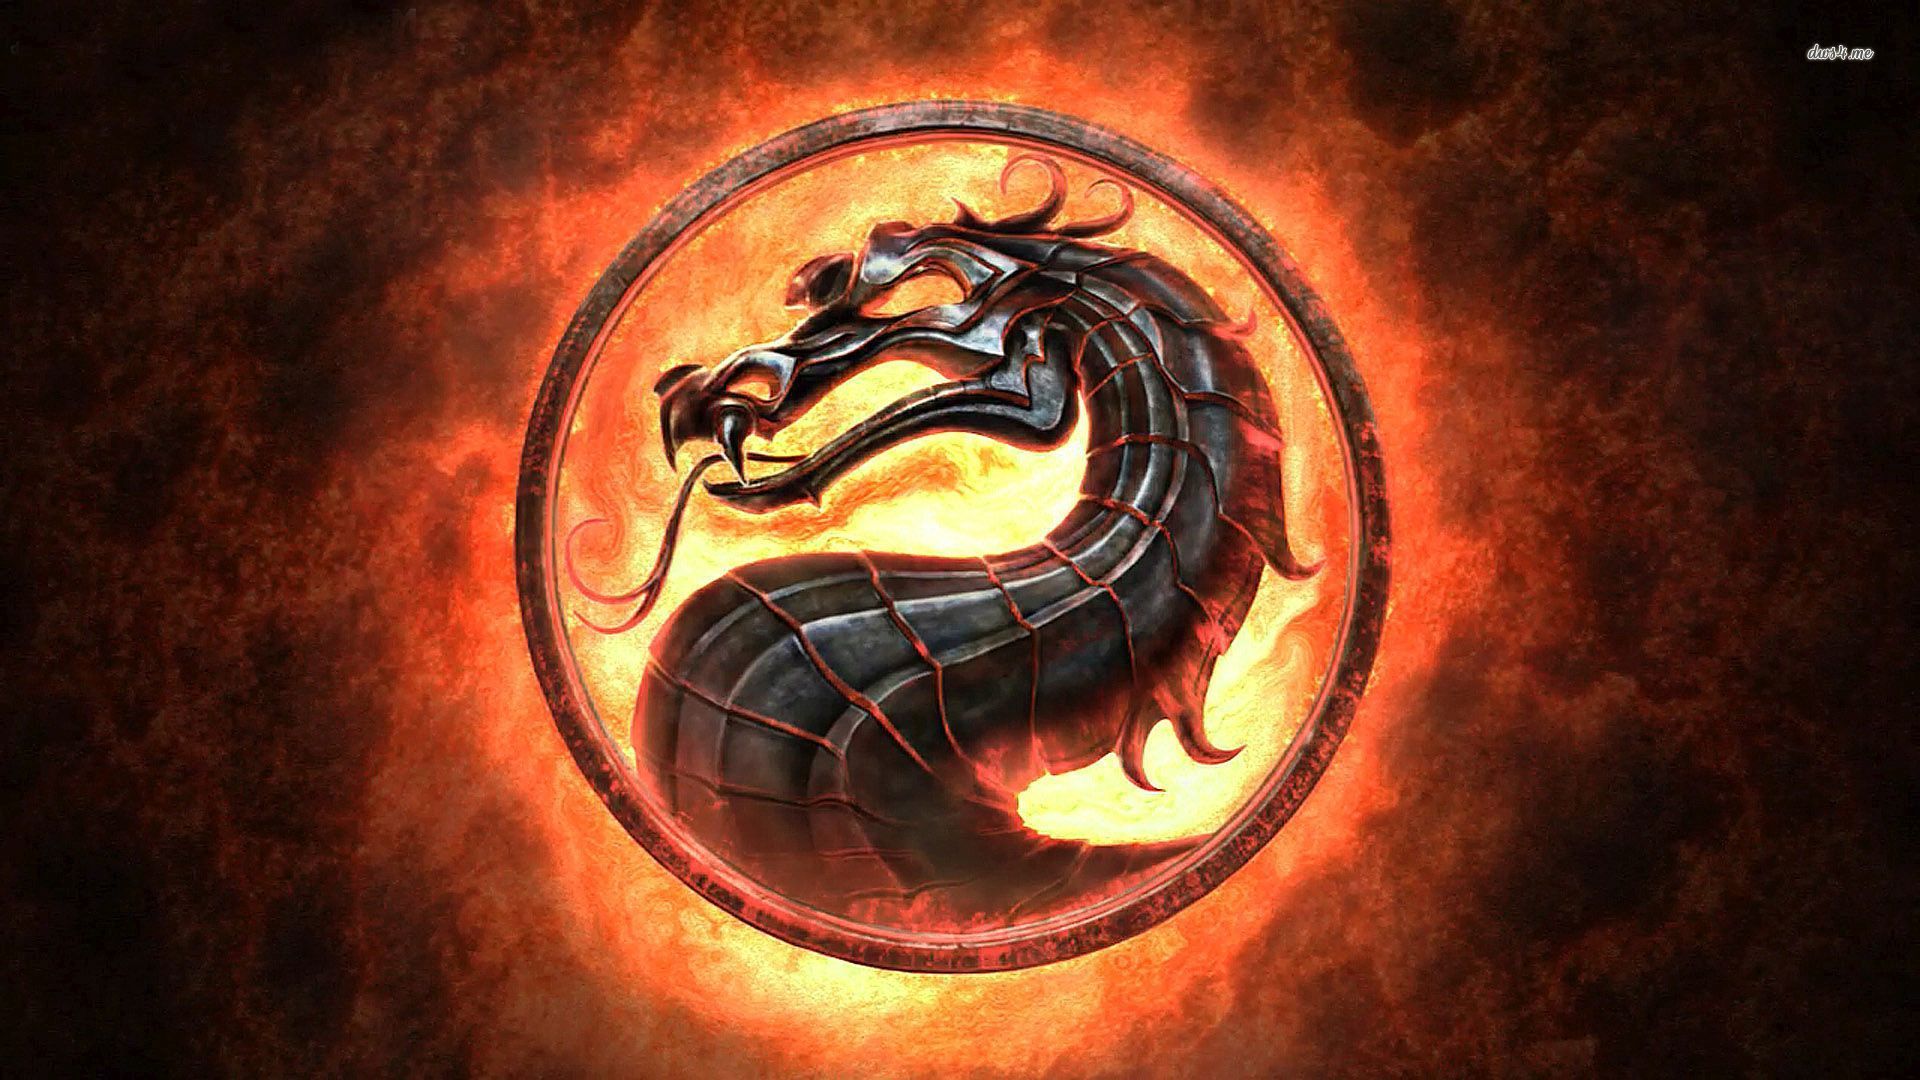 Ps3 Background Mortal Kombat Image Amp Pictures Becuo